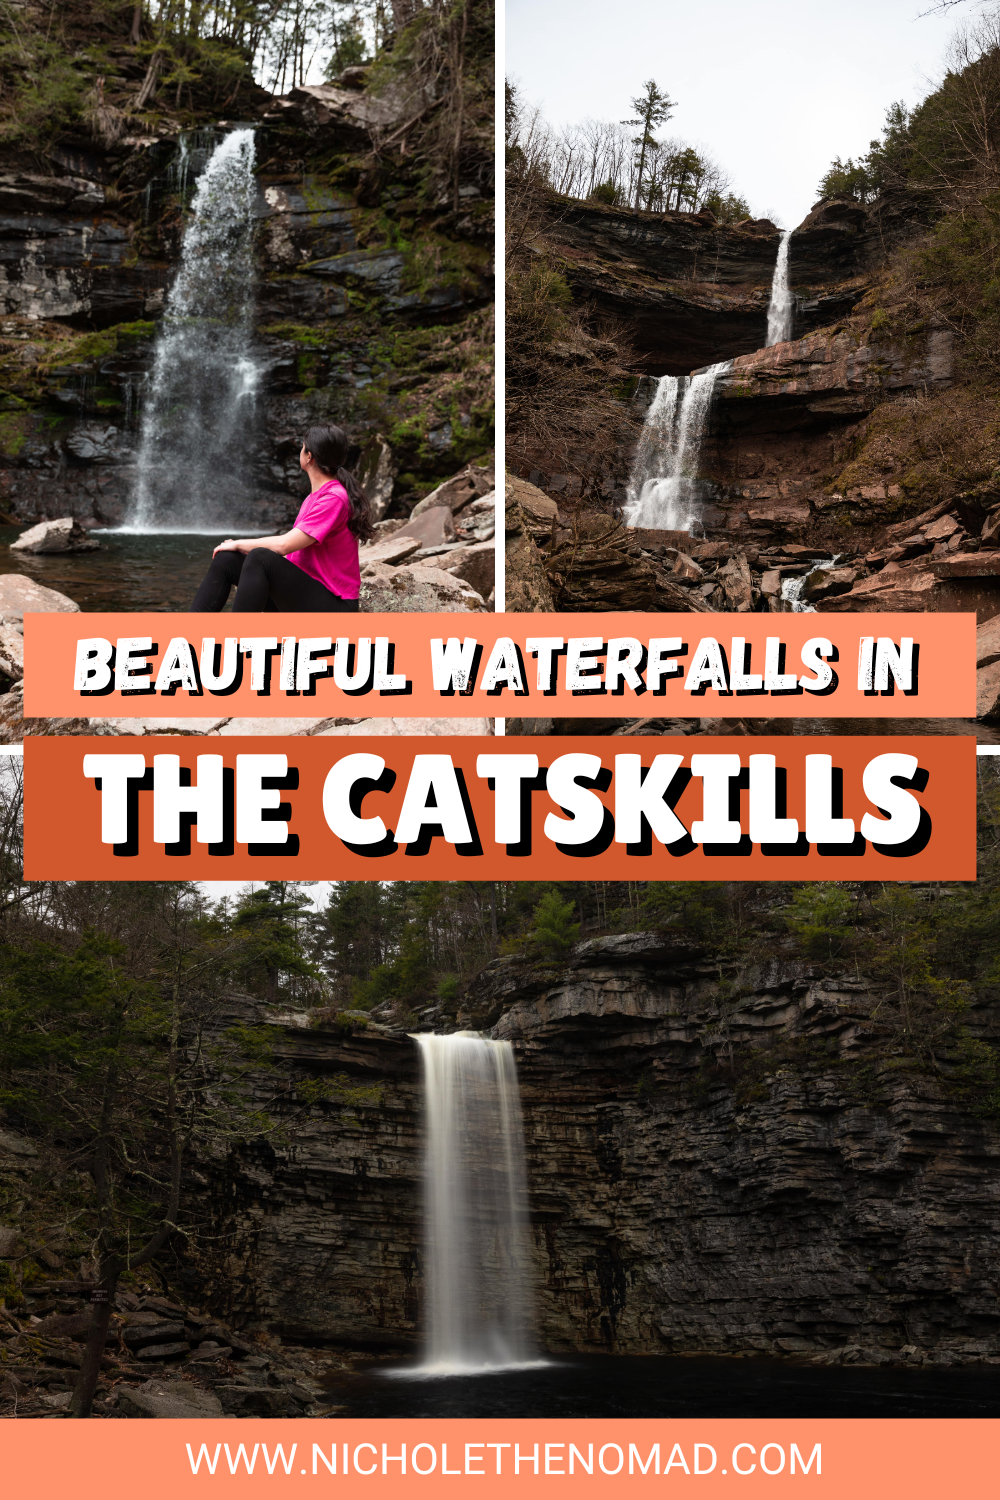 10 Easy Hikes in the Catskills — Nichole the Nomad